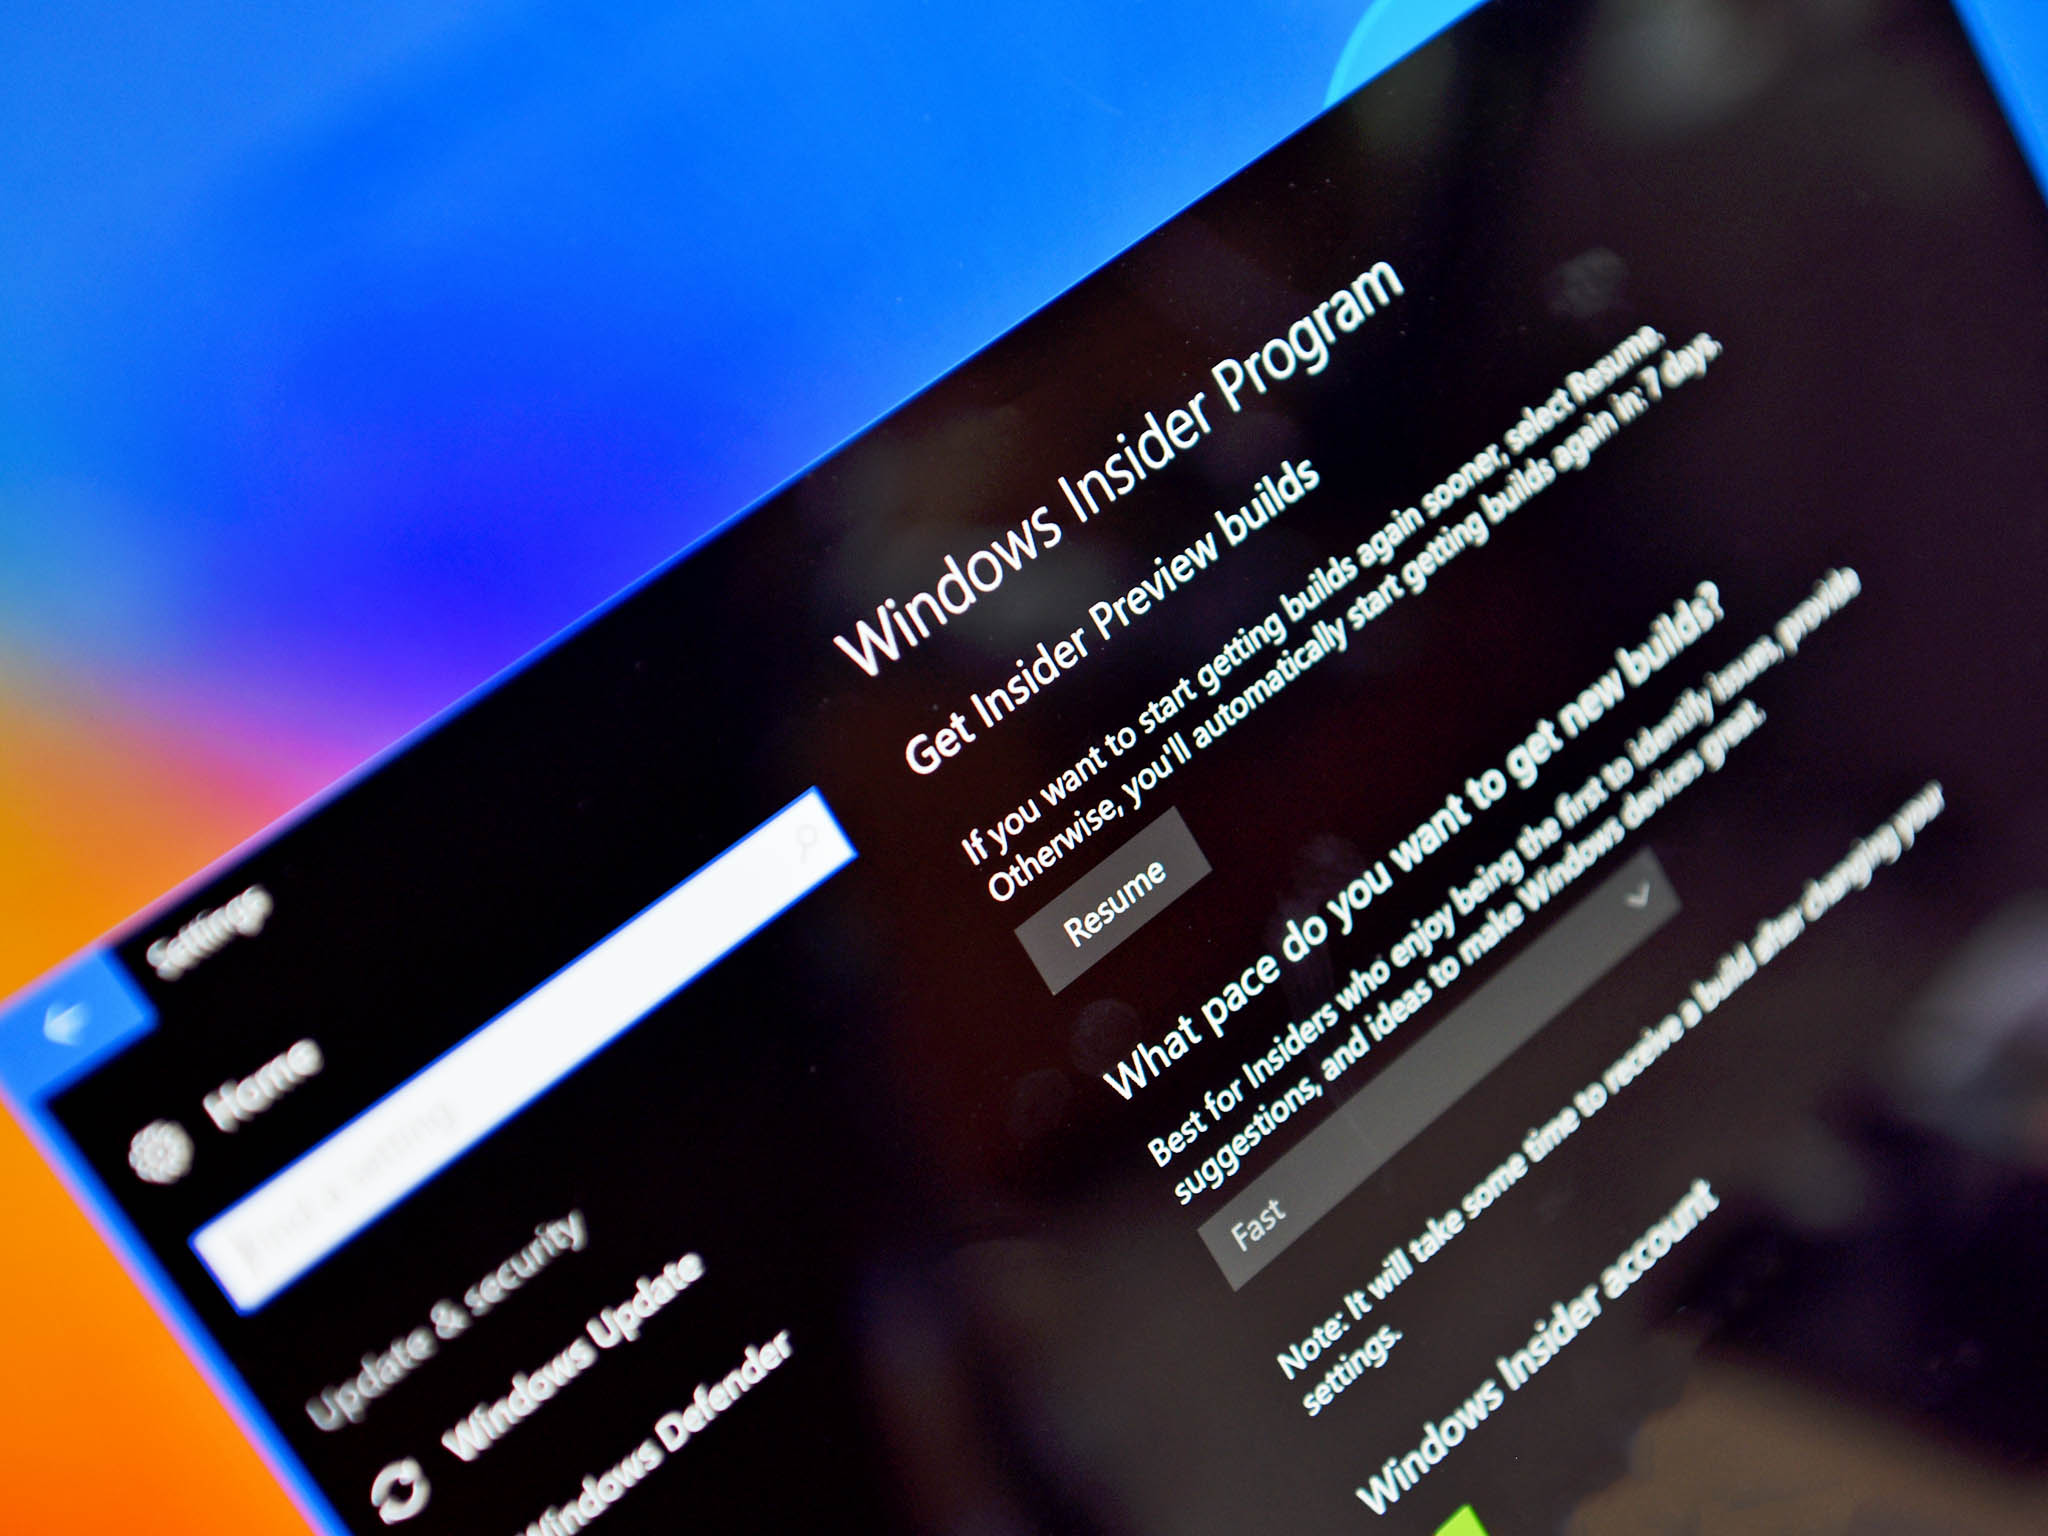 Windows Insider Program: What are the Pros & Cons? | Windows Central